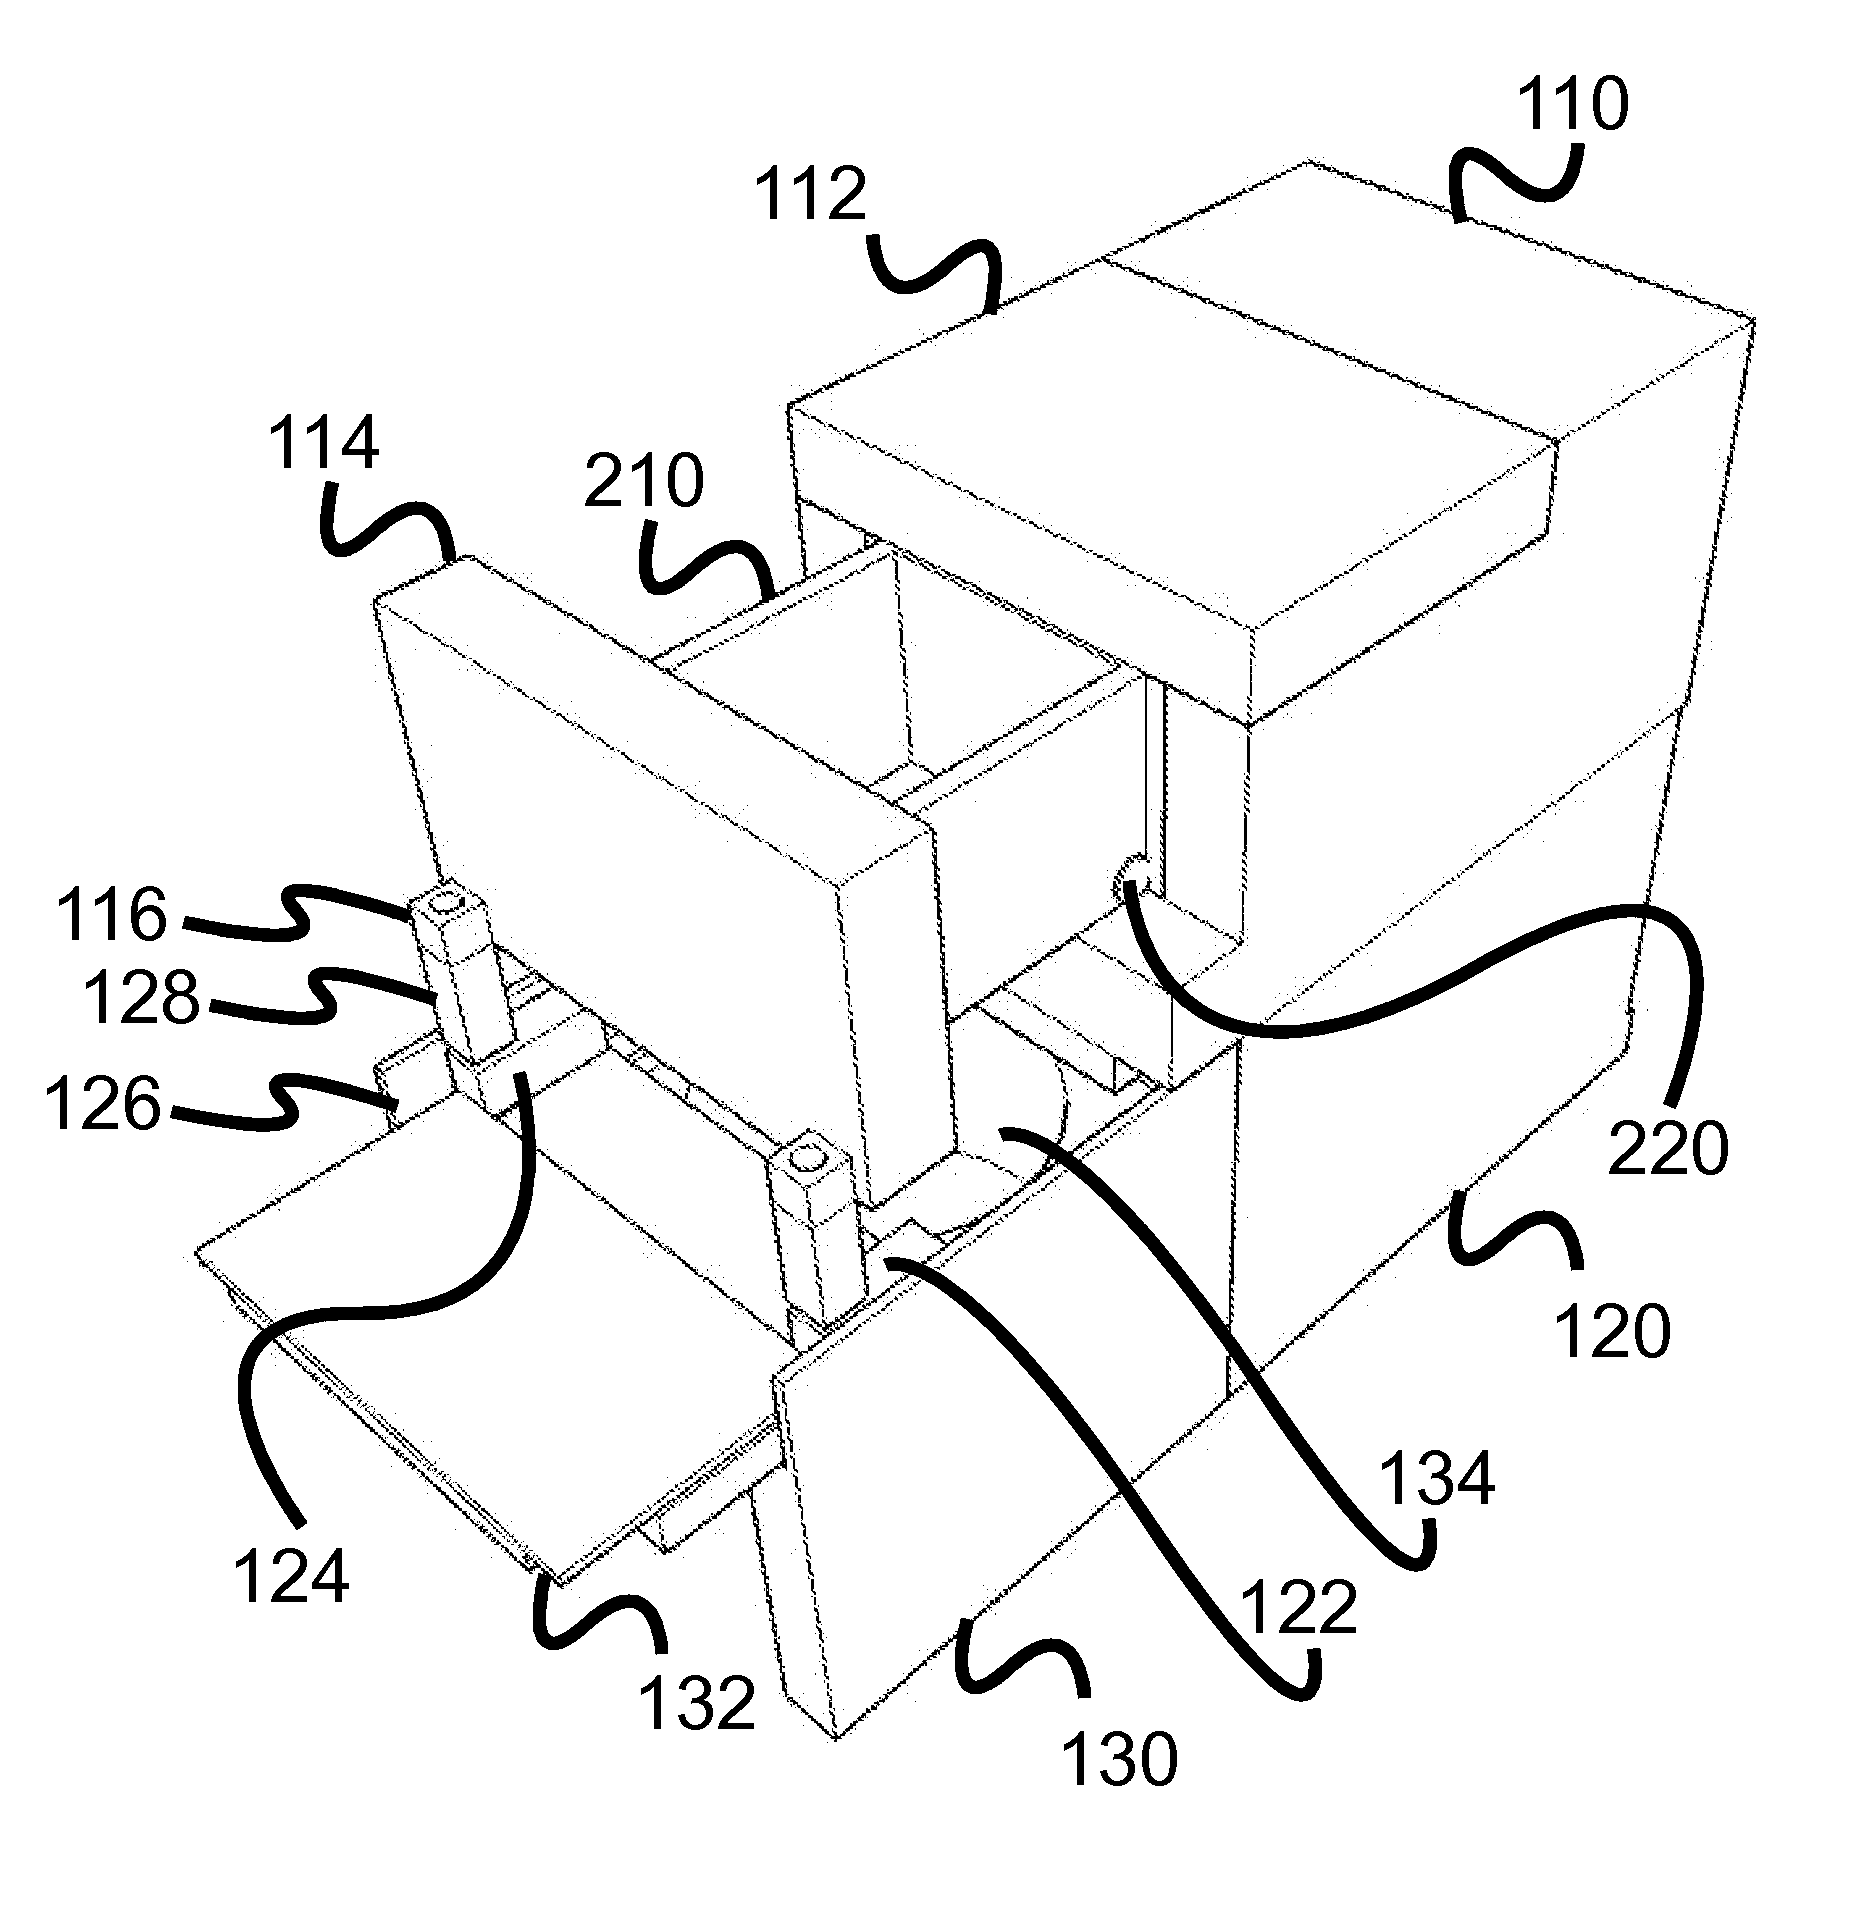 Systems and Methods for Automated Food Preparation